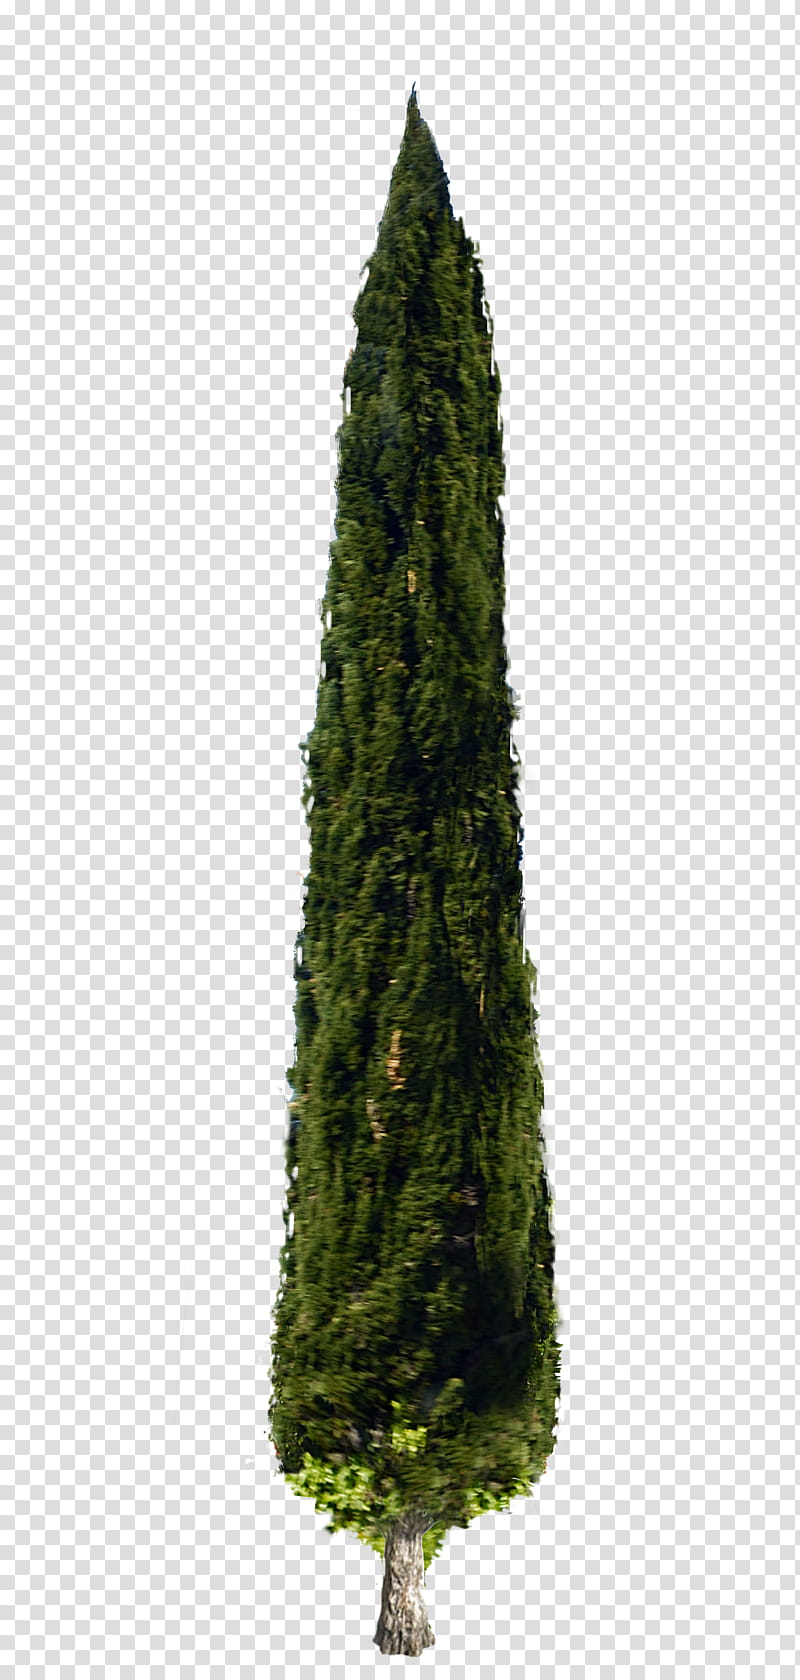 Italian Cypress Tree DSC, green leafed plant transparent background PNG clipart